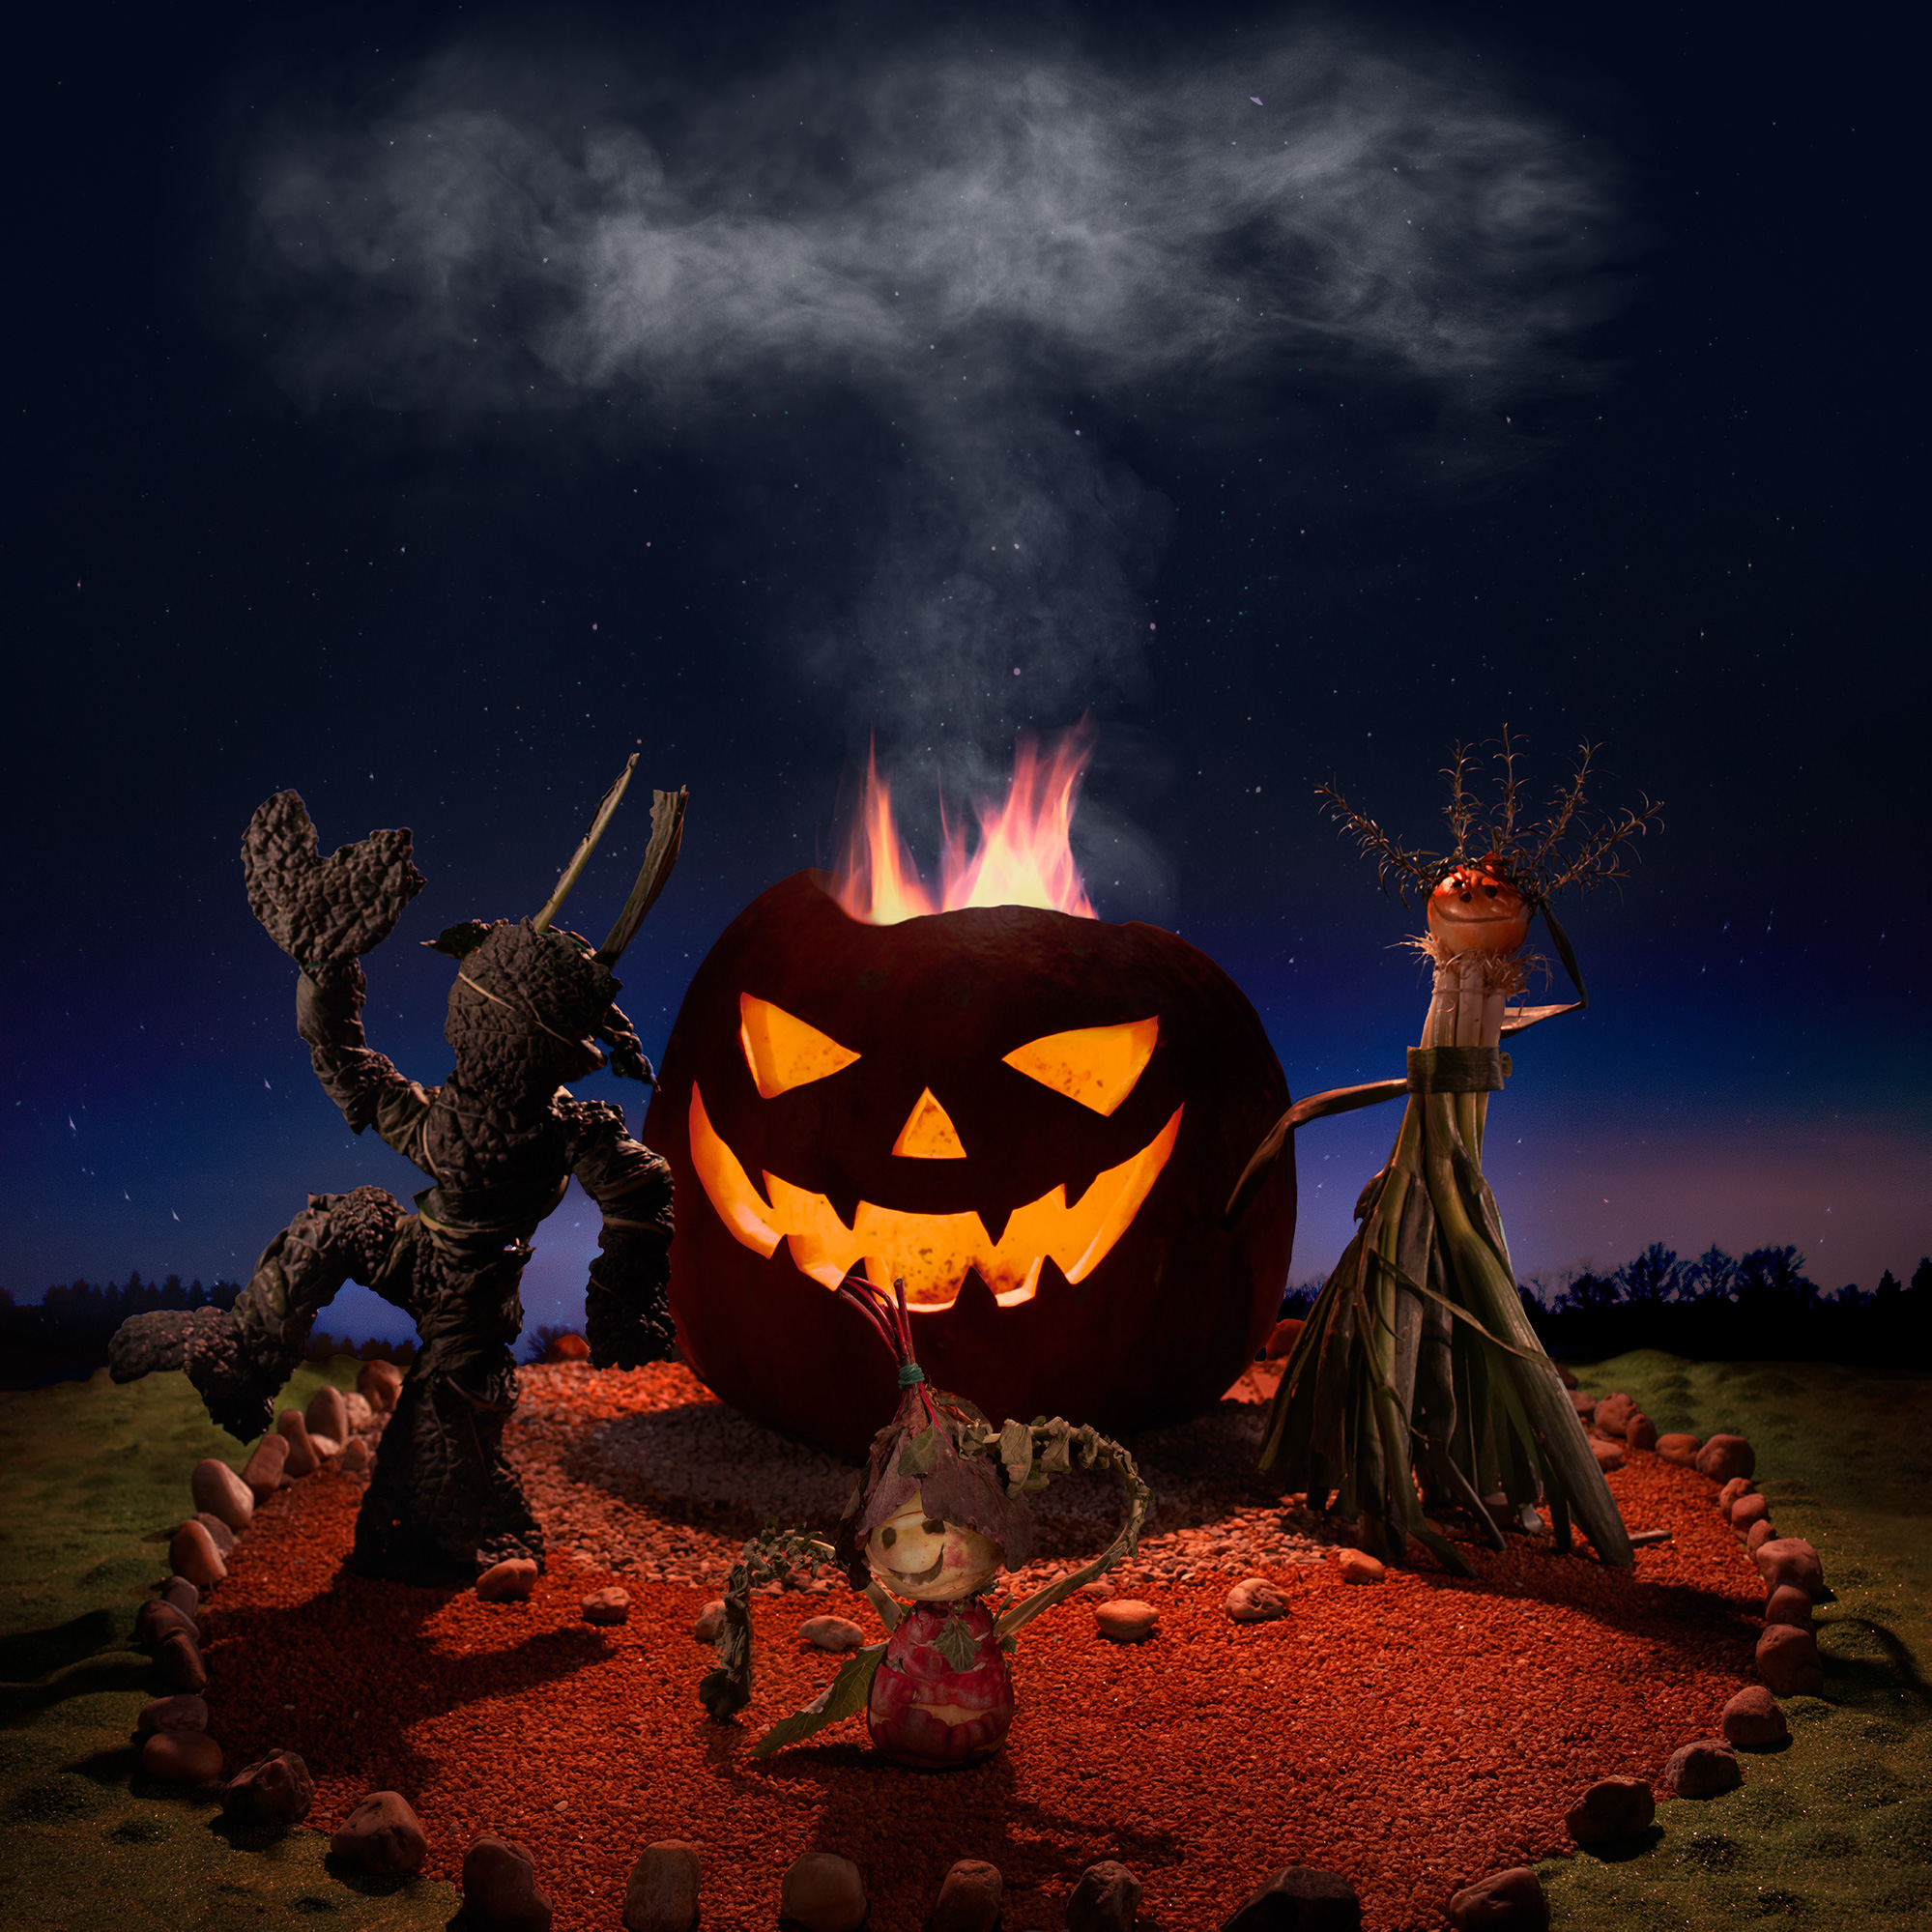 Figures made out of vegetables are dancing around a pumpkin with cut out face and a fire burning within. Kale, turnip and onion.